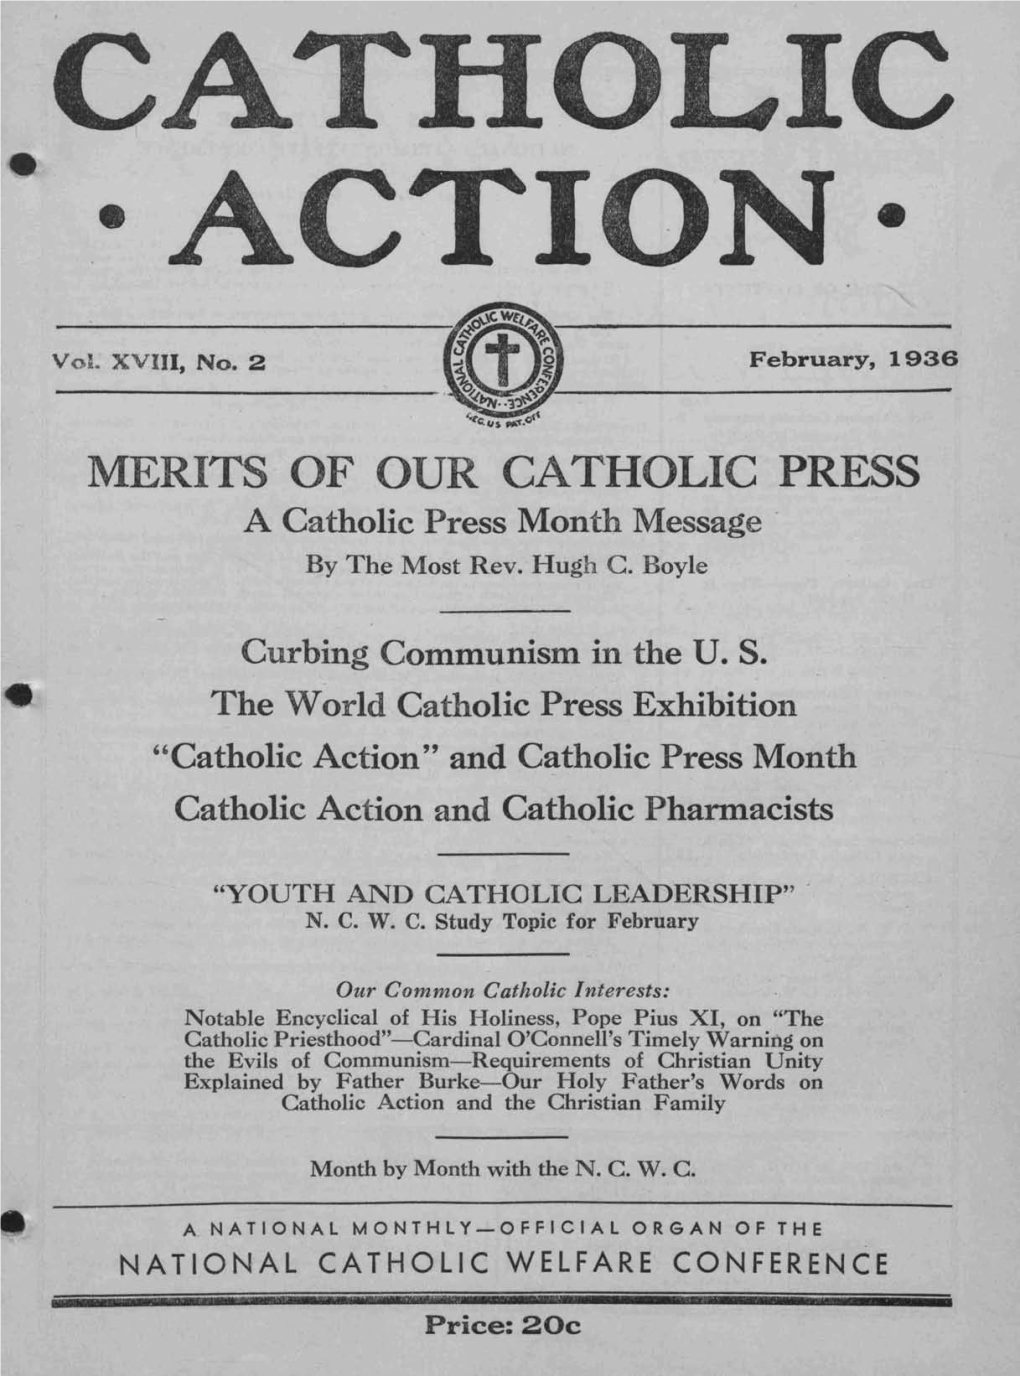 MERITS of OUR CATHOLIC PRESS a Catholic Press Month Message